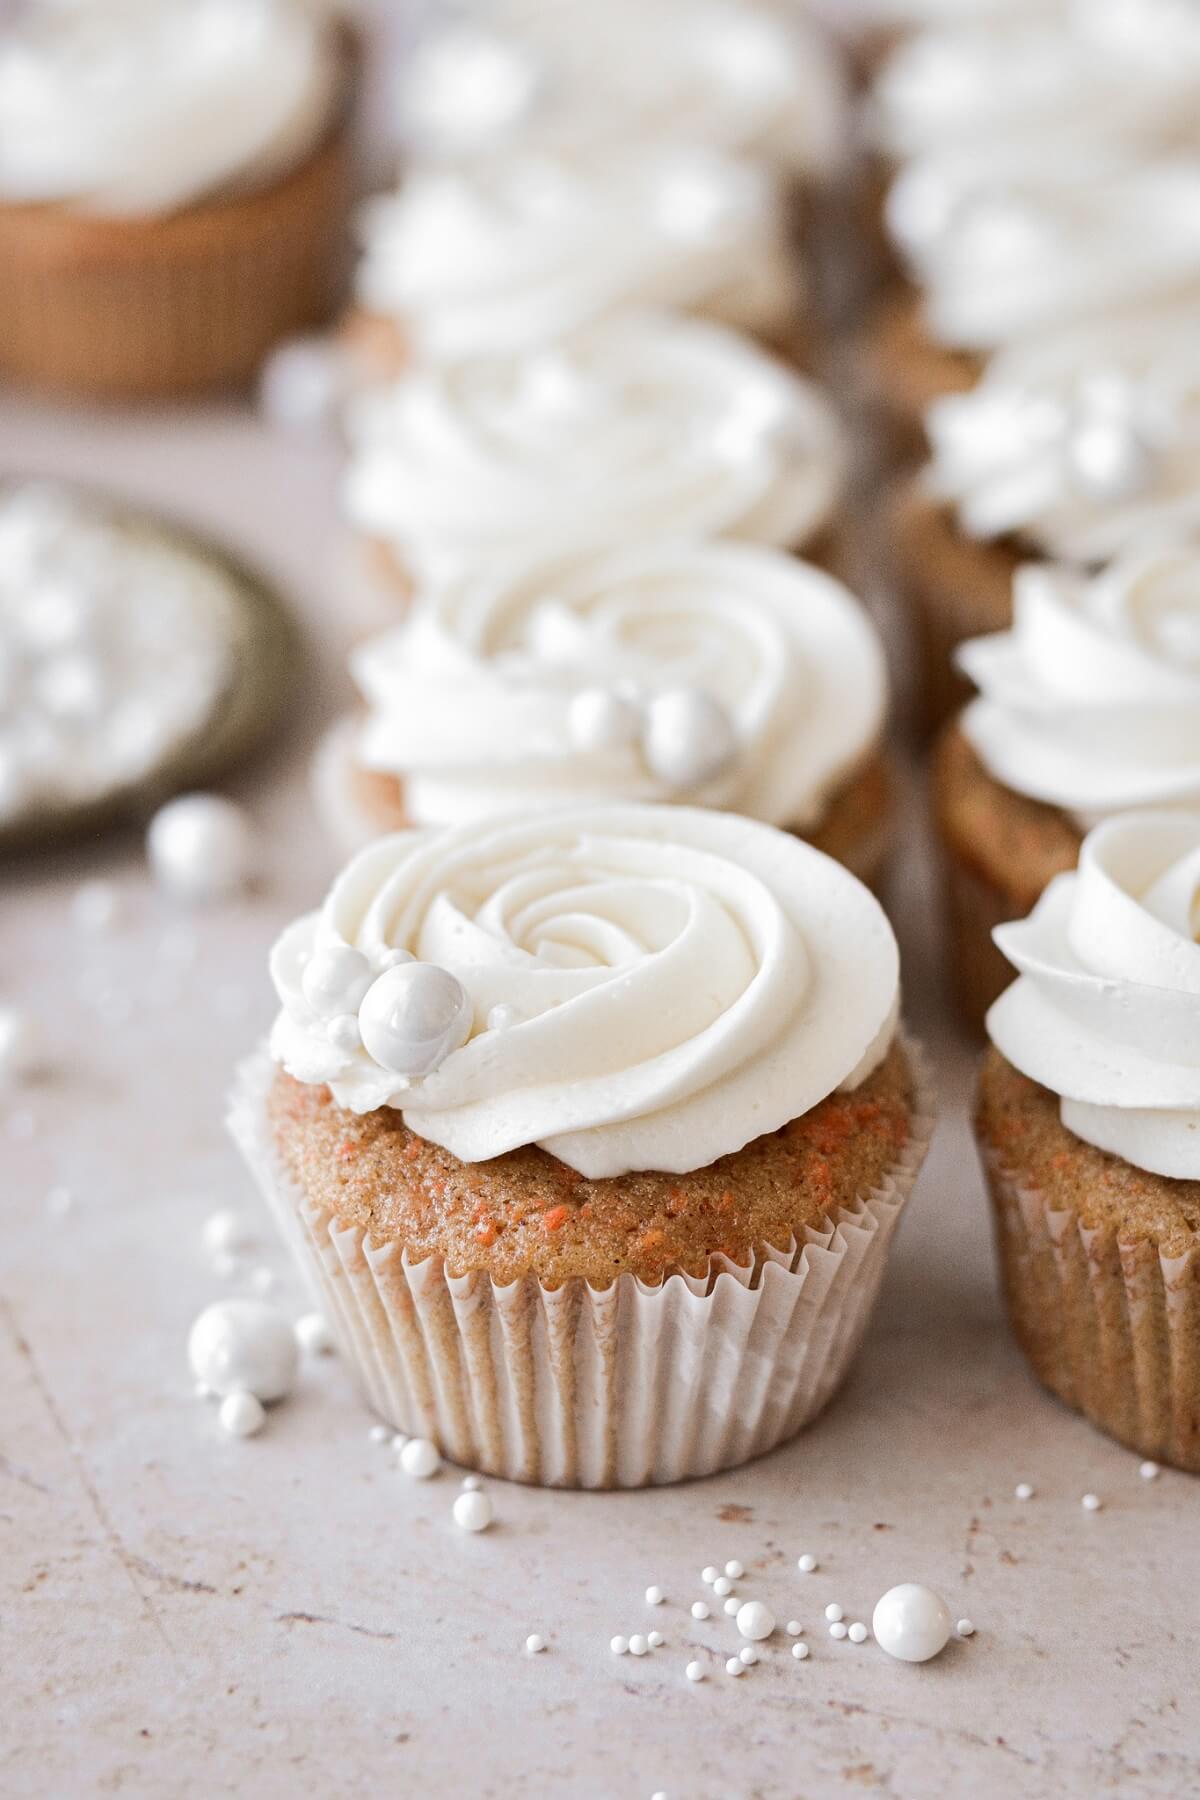 Carrot cake cupcakes with white sugar pearls.